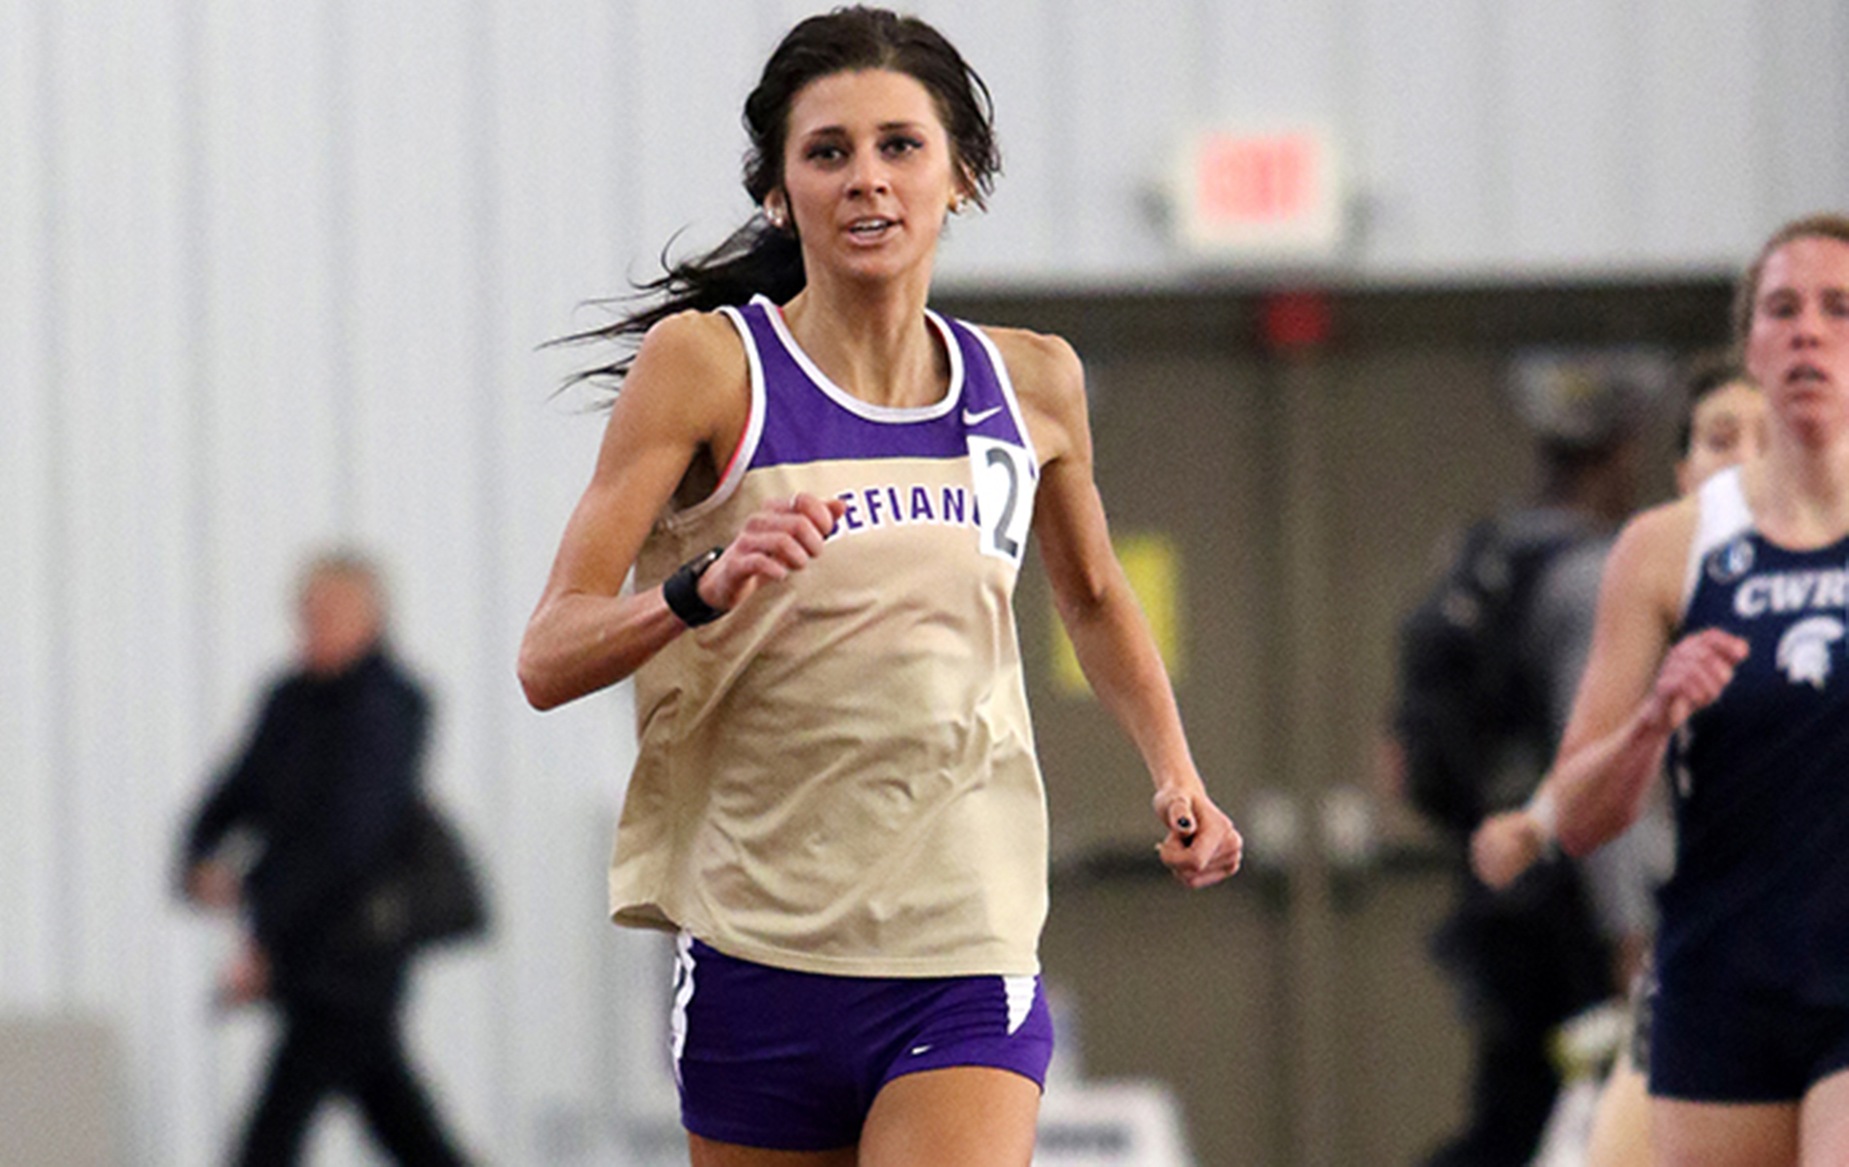 Miller Has Another Record-Setting Day at HCAC Championships